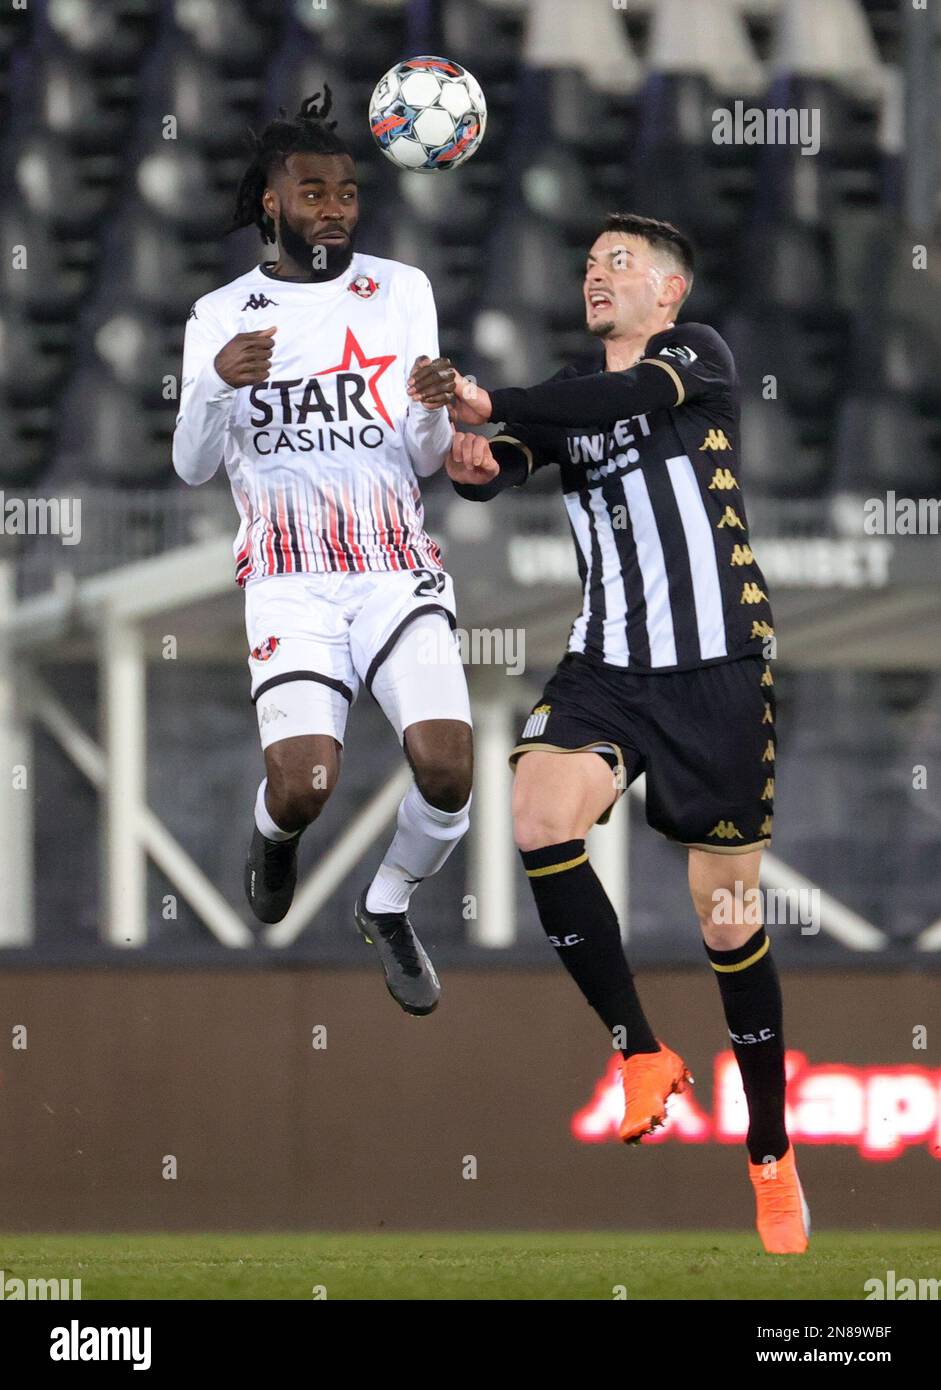 Seraings Junior Mansoni Sambu and Charlerois Stefan Knezevic fight for the ball during a soccer match between Sporting Charleroi and RFC Seraing, Saturday 11 February 2023 in Charleroi, on day 25 of